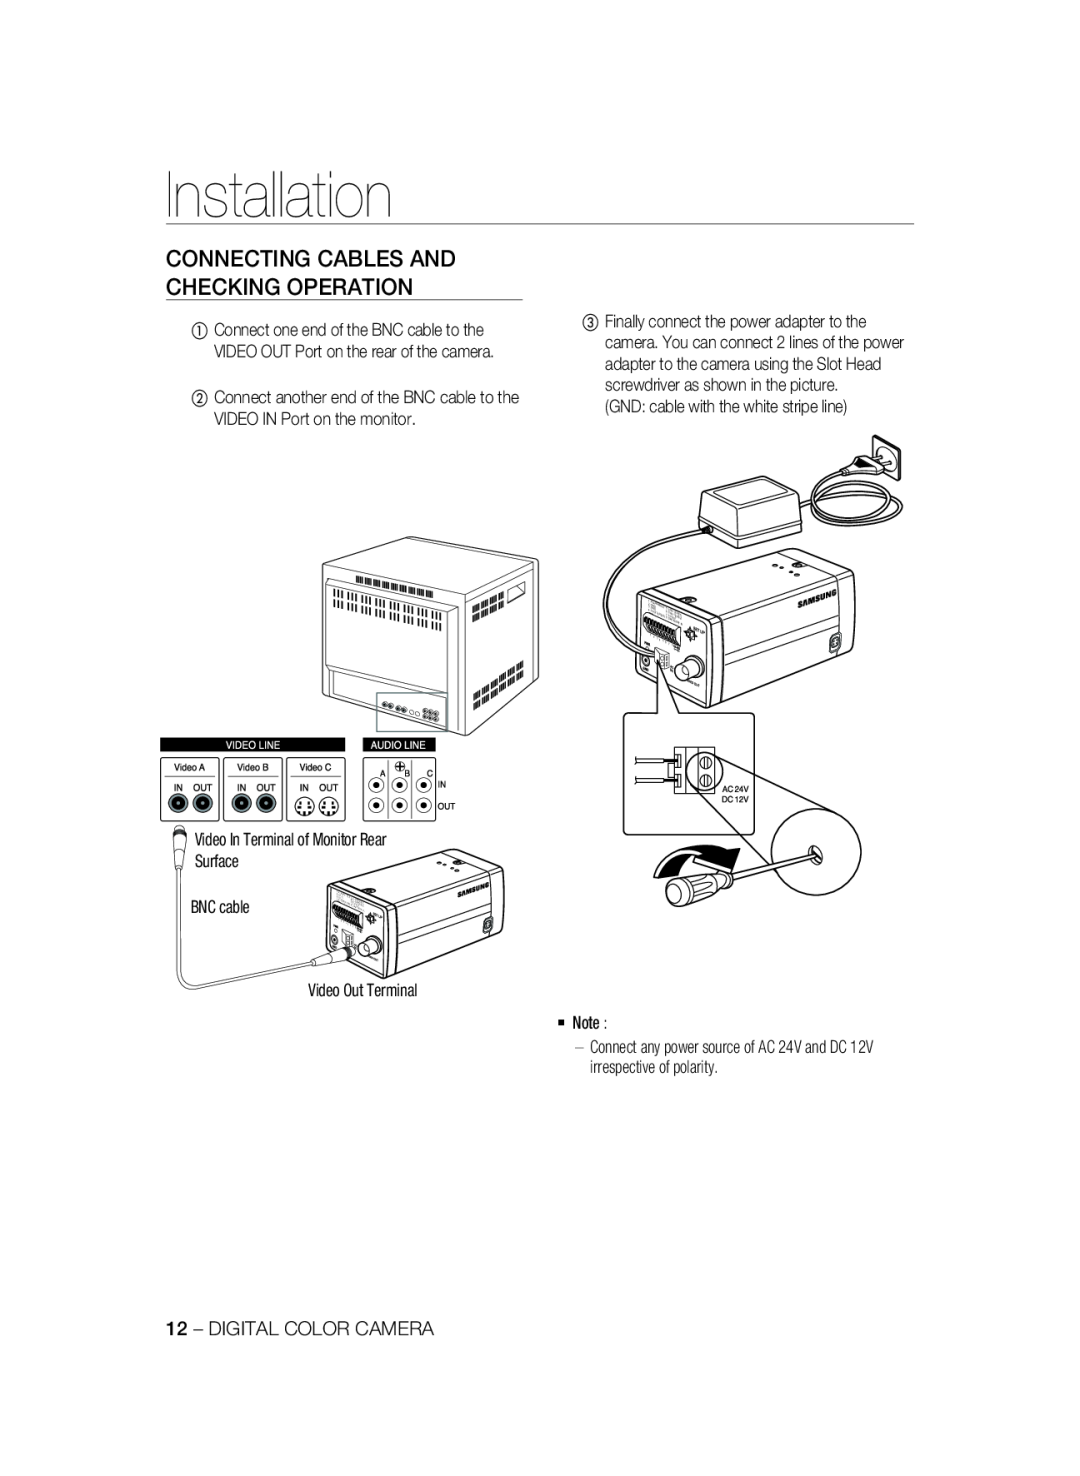 Samsung SCC-B2337P, SCC-B2037P manual Installation, Connecting Cables And Checking Operation 